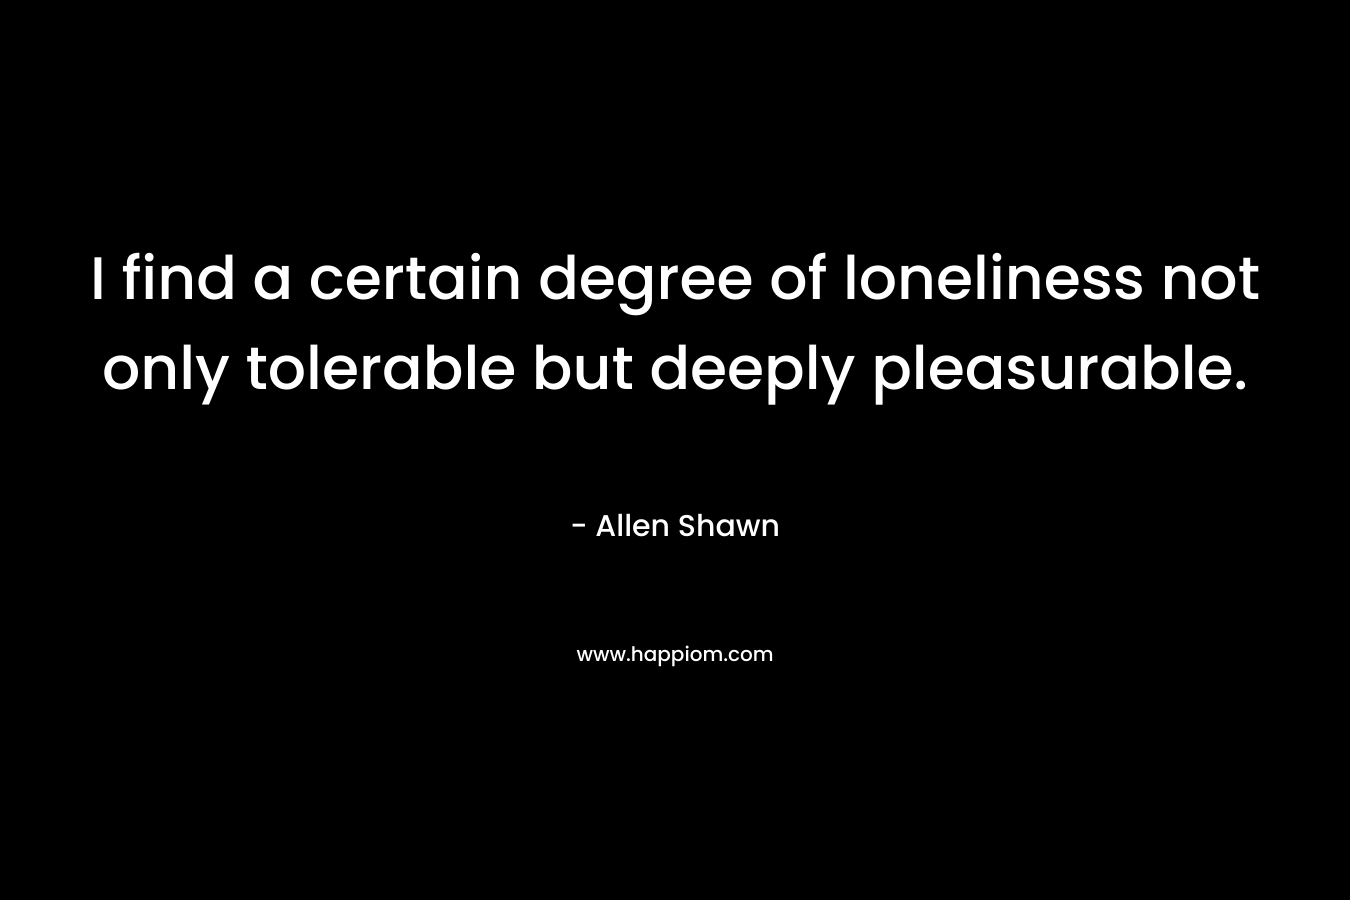 I find a certain degree of loneliness not only tolerable but deeply pleasurable. – Allen Shawn